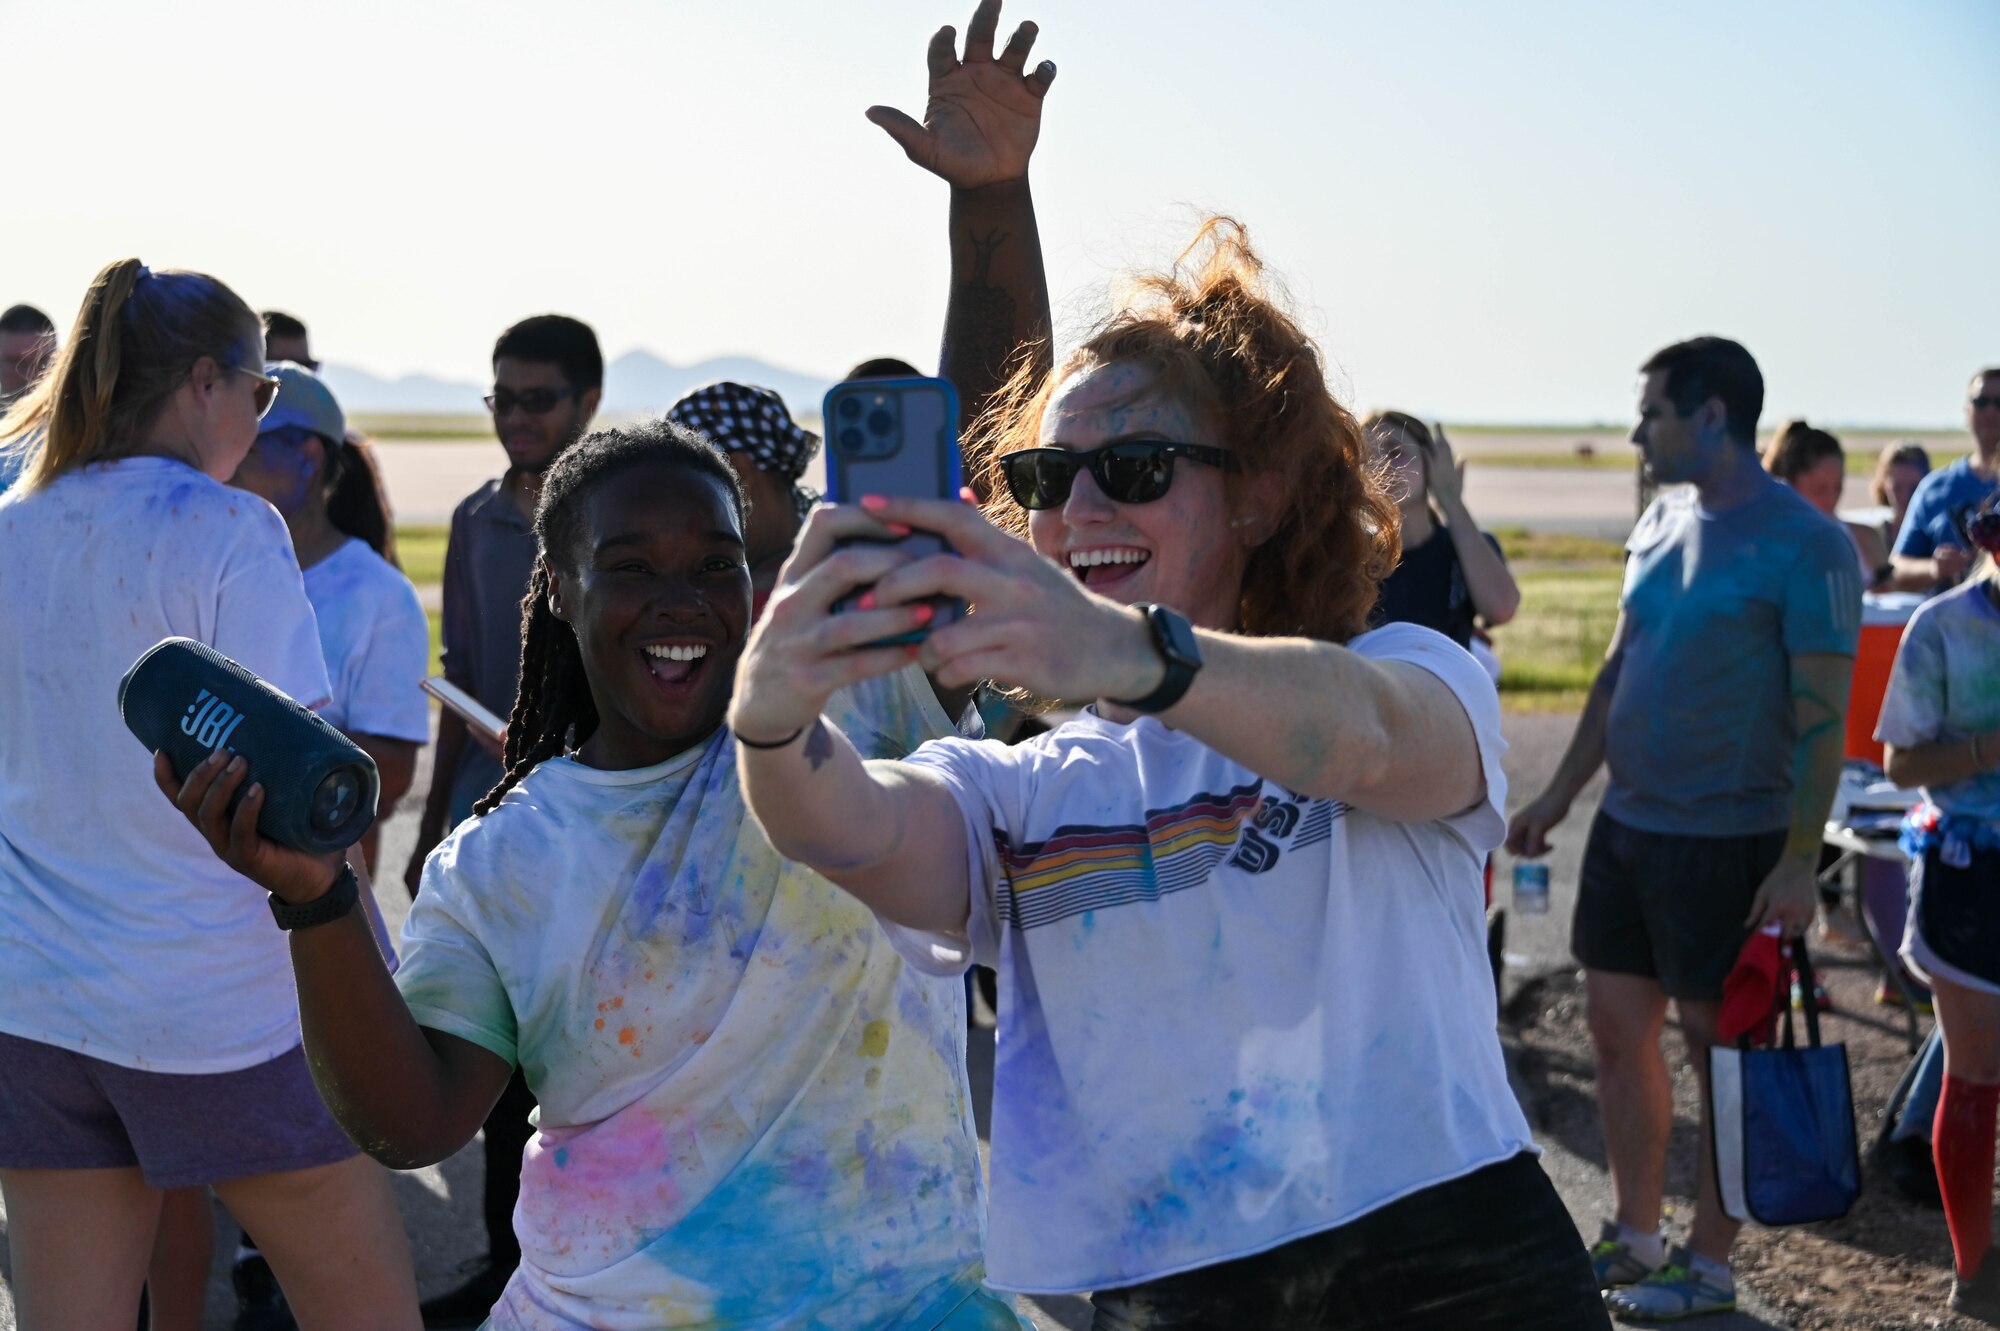 U.S. Air Force 1st Lt. Destini Hamilton (left), 97th Air Mobility Wing executive officer, and 1st Lt. Erica Craft, 97th Comptroller Squadron deputy budget officer, take a photo together at the Pride Month color run at Altus Air Force Base, Oklahoma, June 24, 2022. The first large Pride event was held in New York City on June 28, 1970, on the one-year anniversary of the Stonewall Uprising. (U.S. Air Force photo by Senior Airman Kayla Christenson)